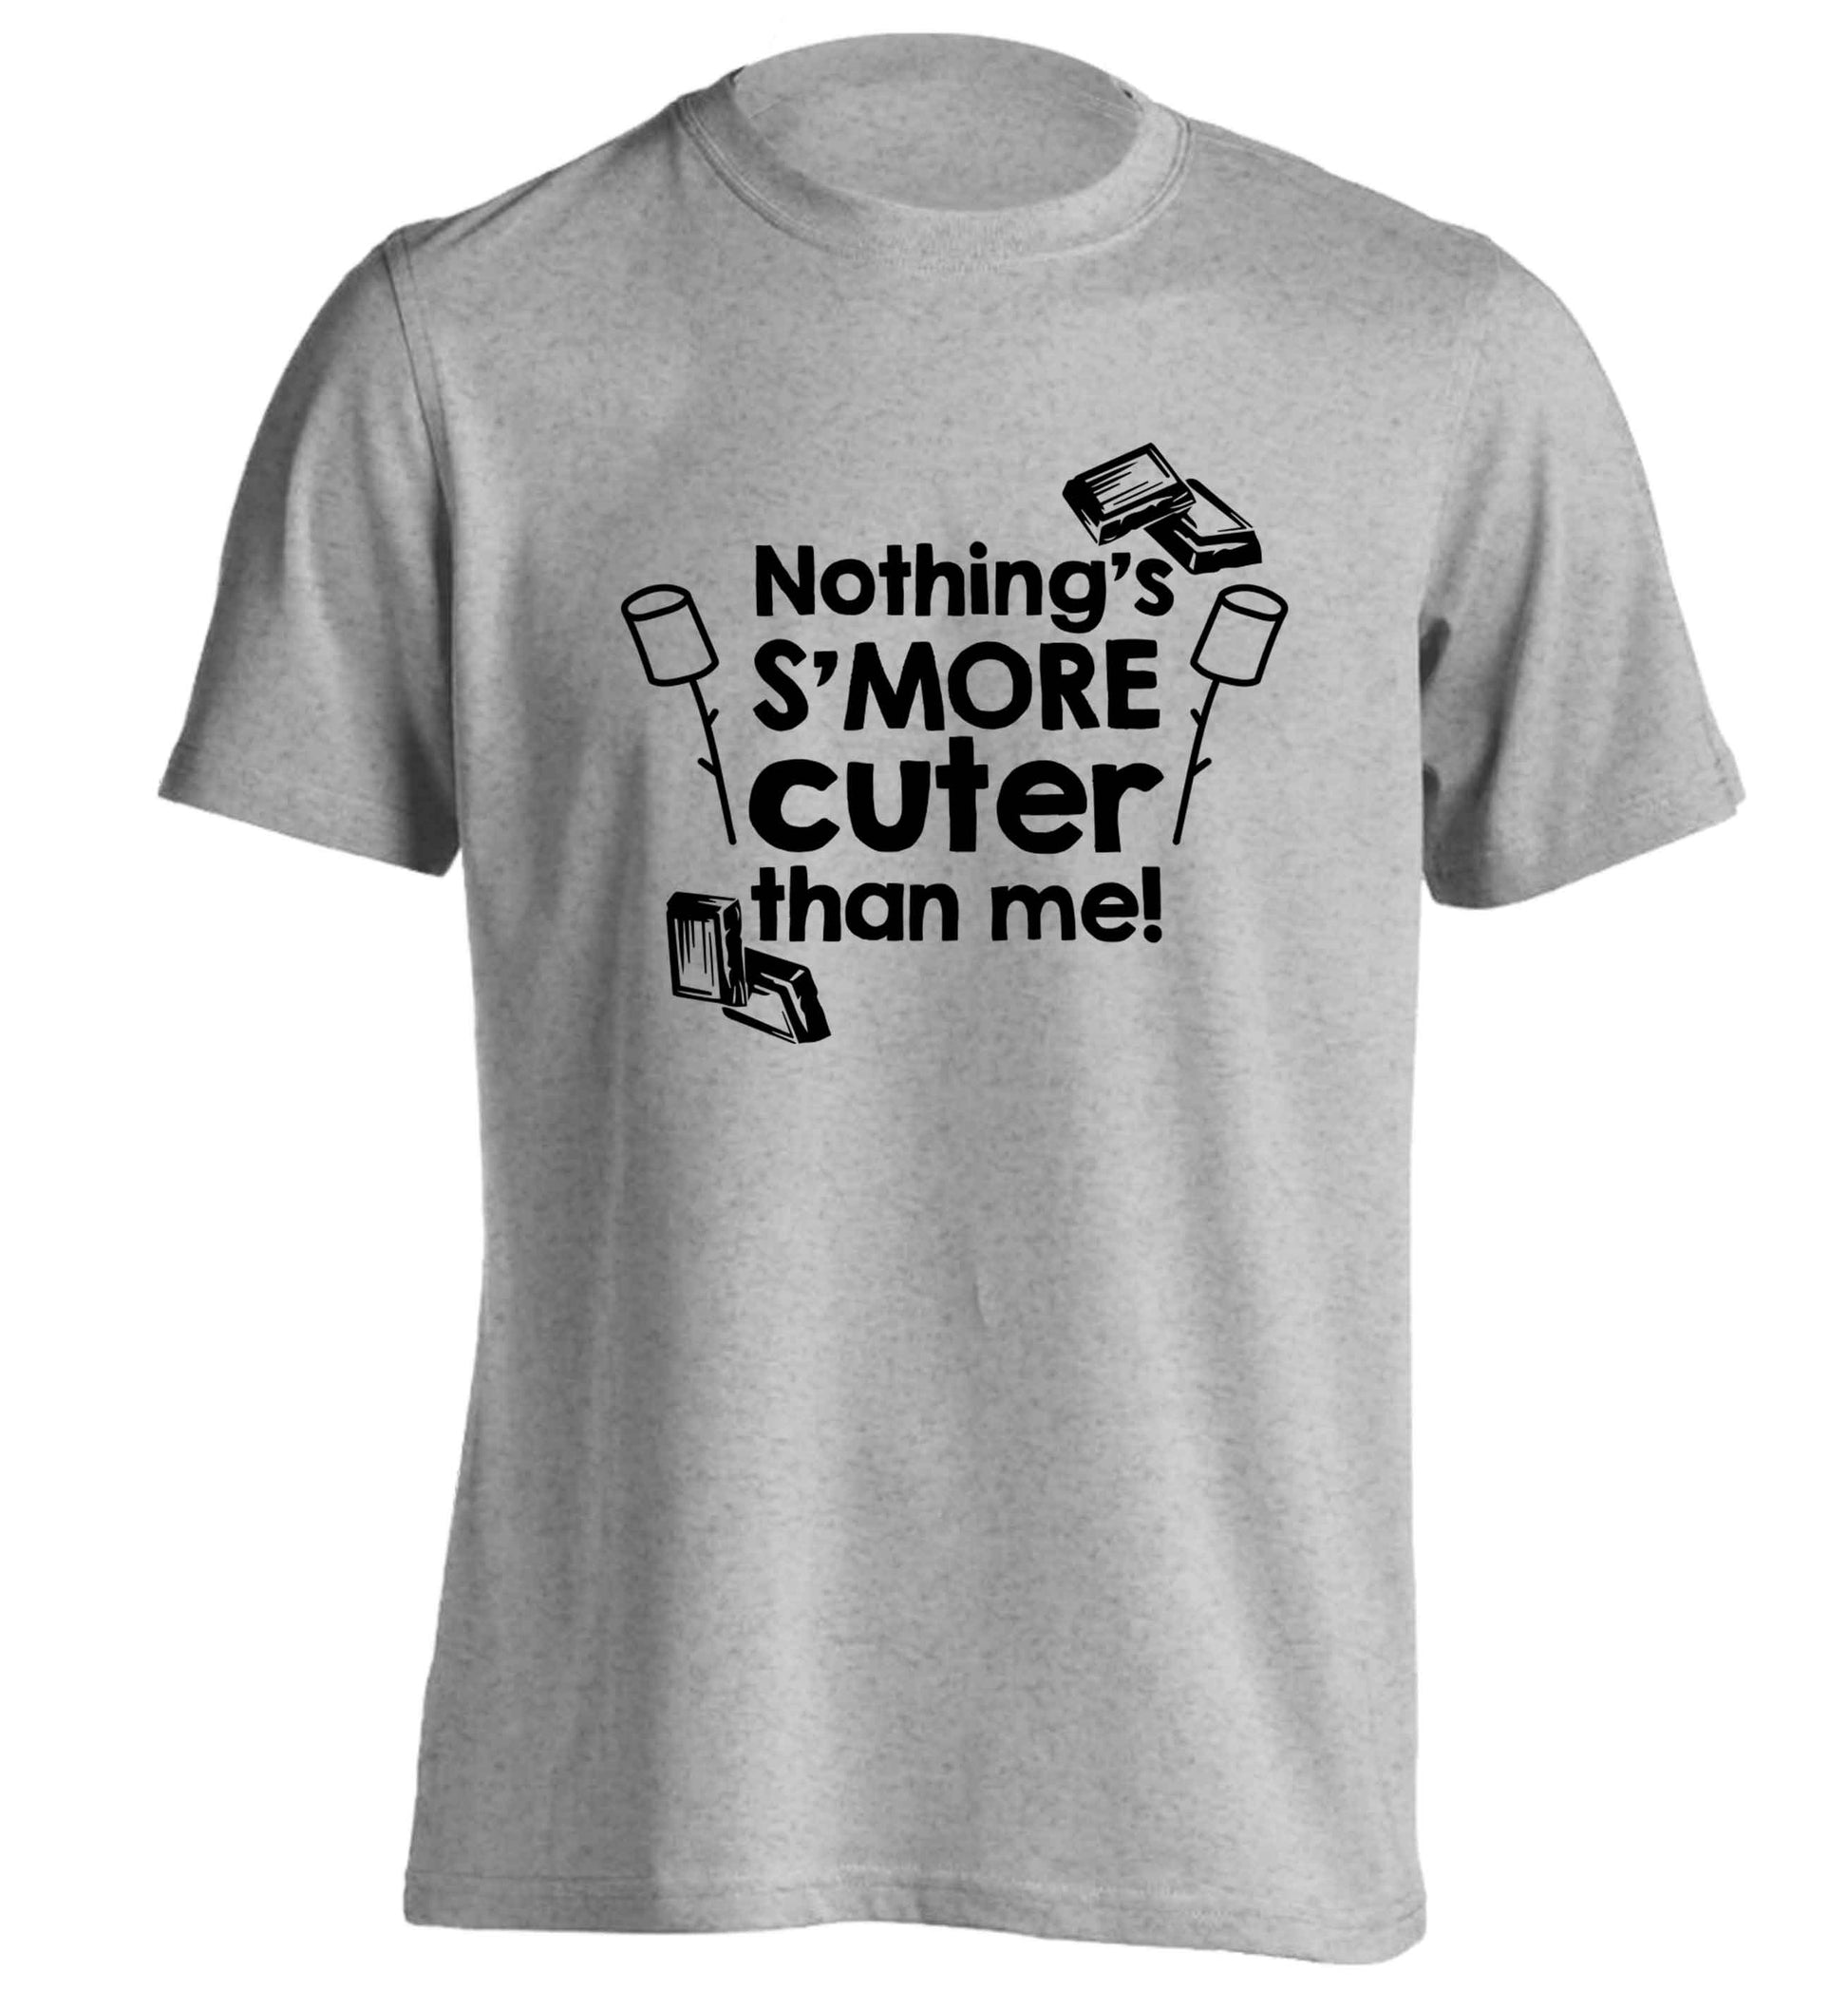 Nothing's s'more cuter than me! adults unisex grey Tshirt 2XL